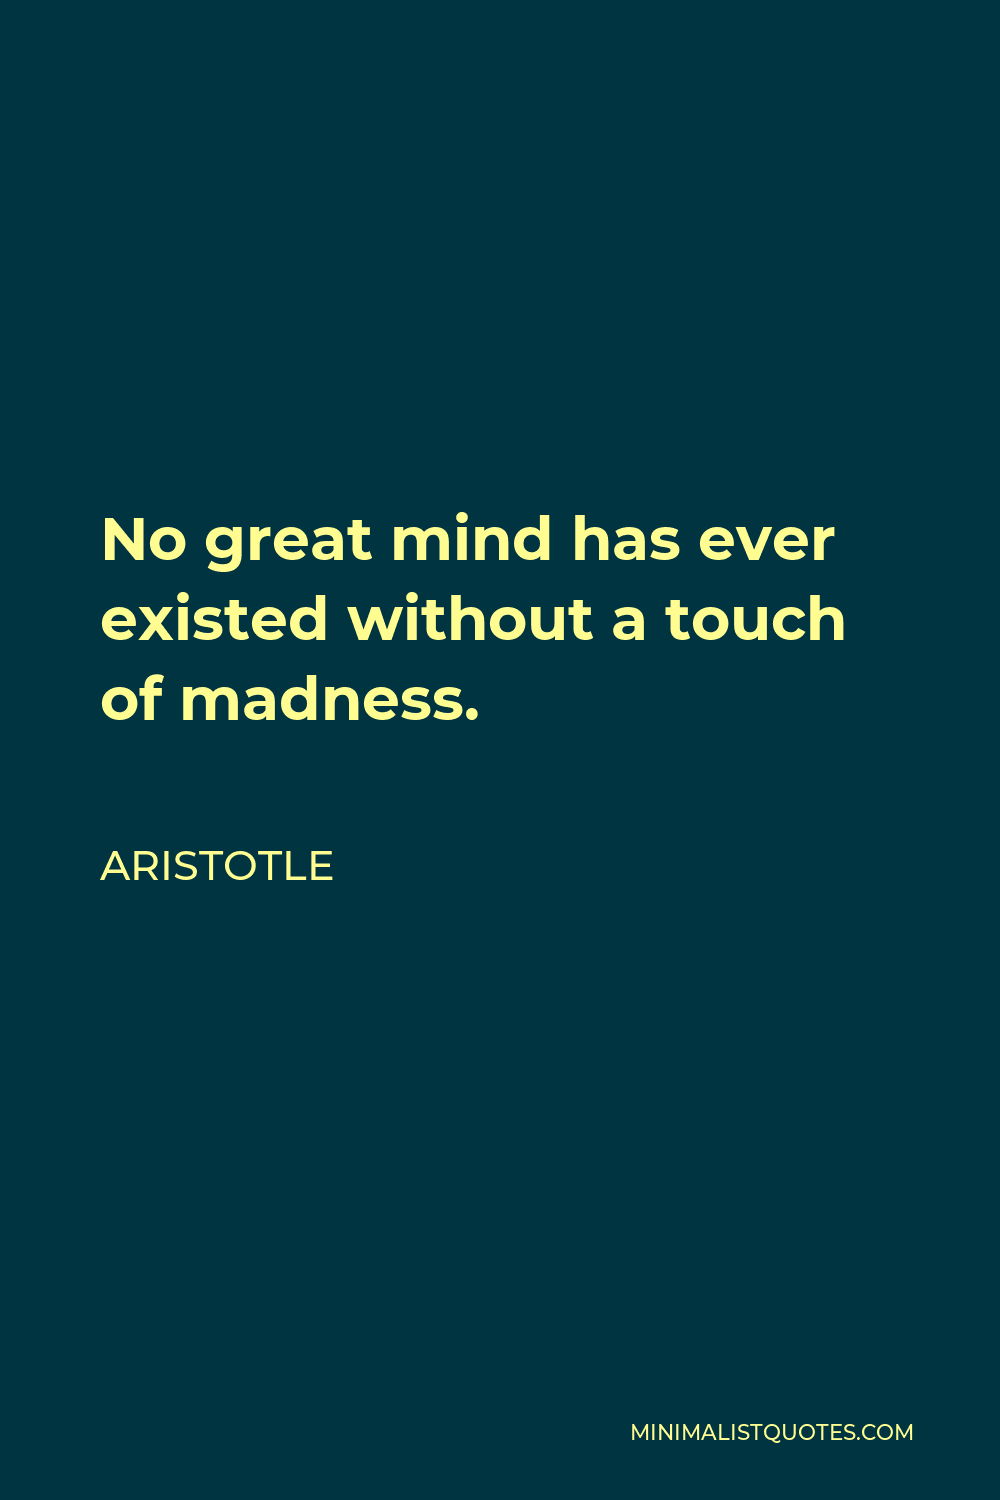 Aristotle Quote - No great mind has ever existed without a touch of madness.